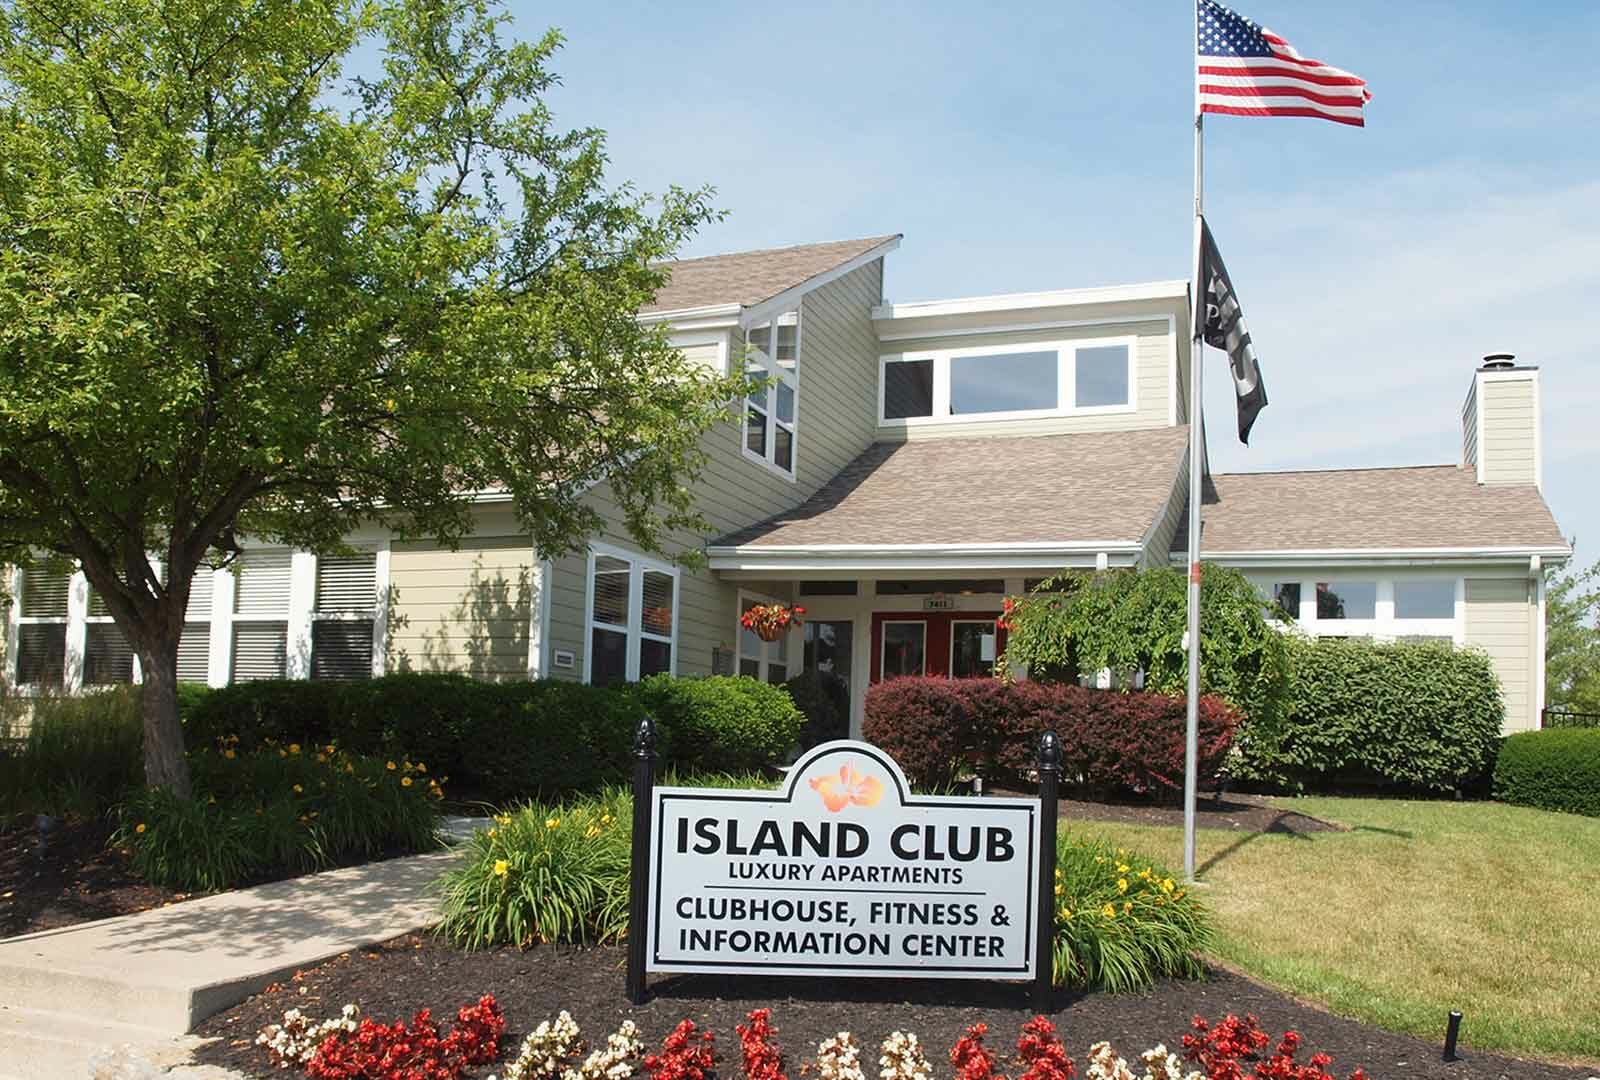 Exterior of leasing center at Island Club.